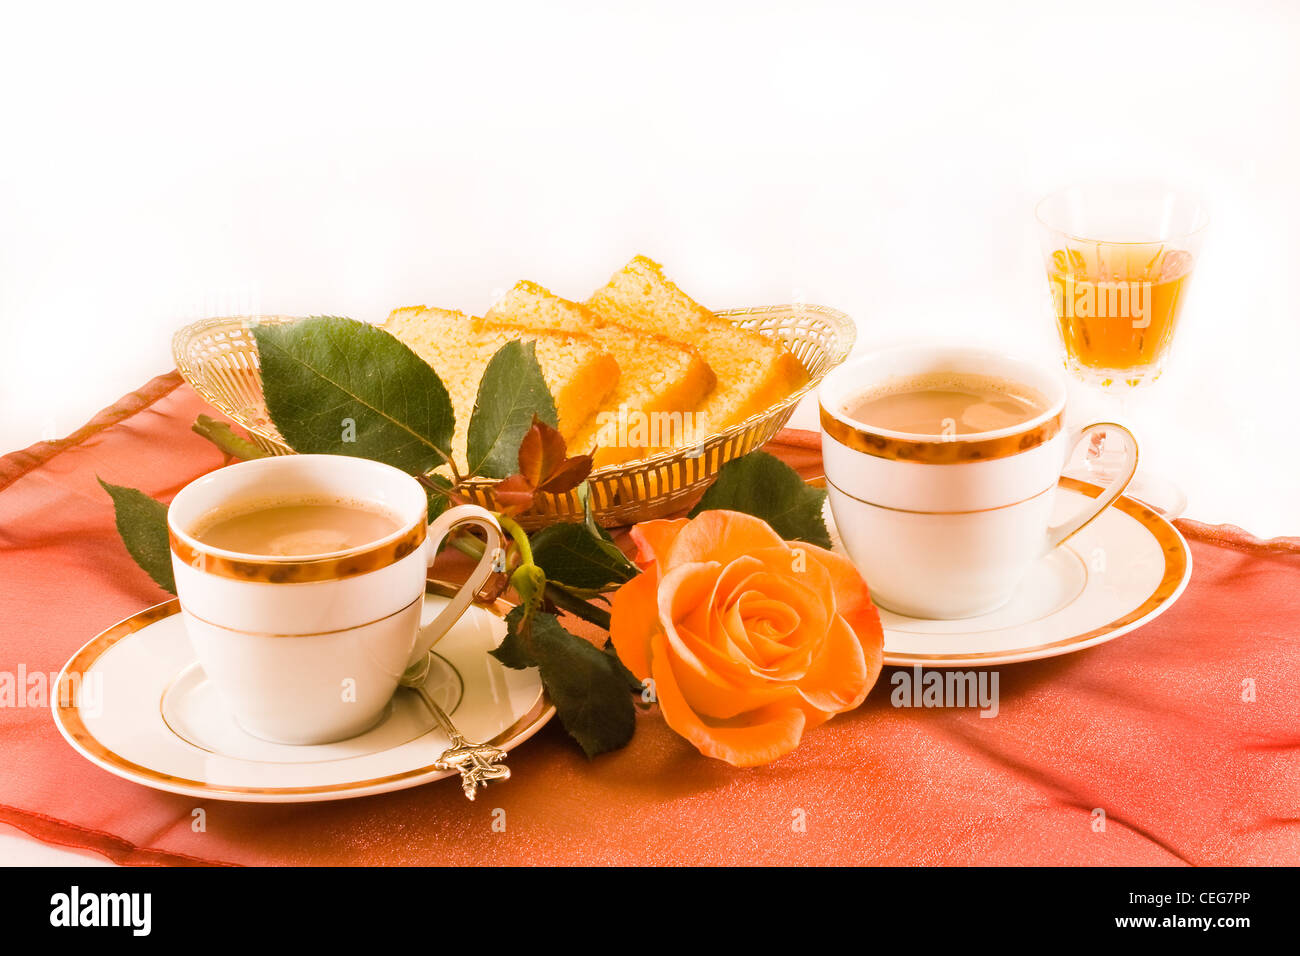 Two cups of coffee with cake and a glass of amaretto liqueur Stock Photo